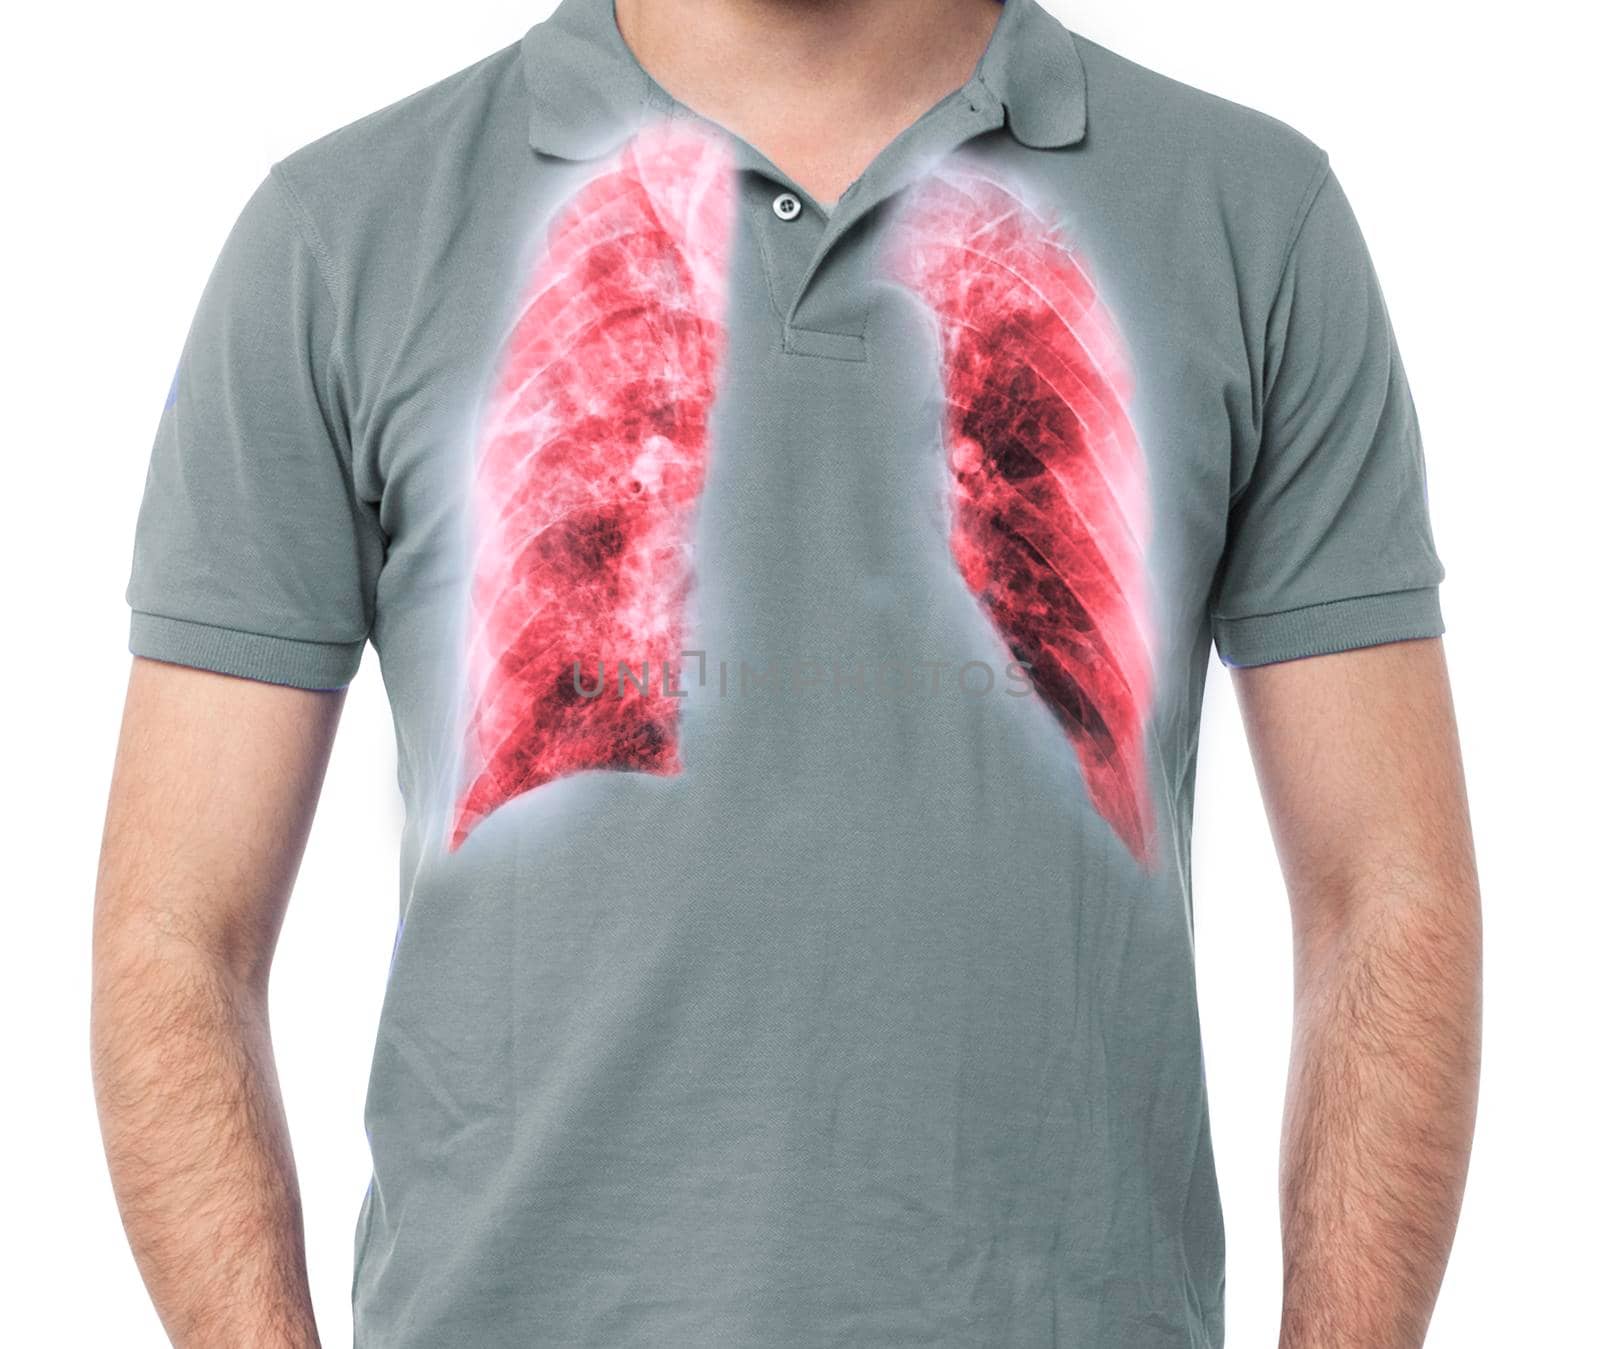 Chest X-ray or X-Ray Image Of Human Chest or Lung ( red zone ) inside thorax showing tuberculosis by samunella